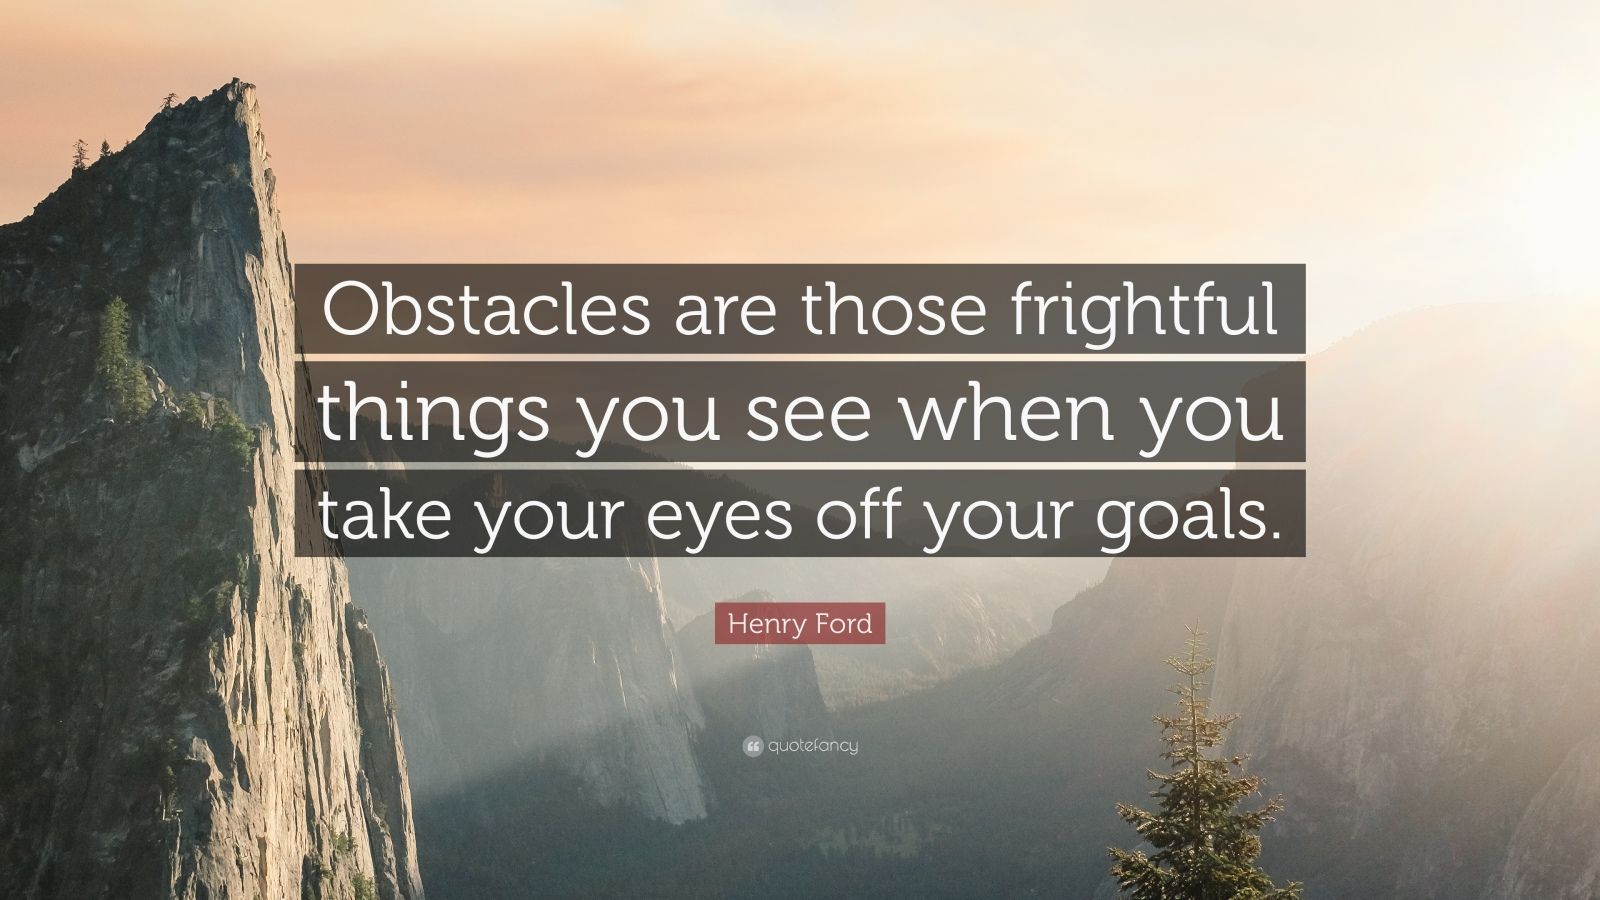 Henry Ford Quote “Obstacles are those frightful things you see when you take your